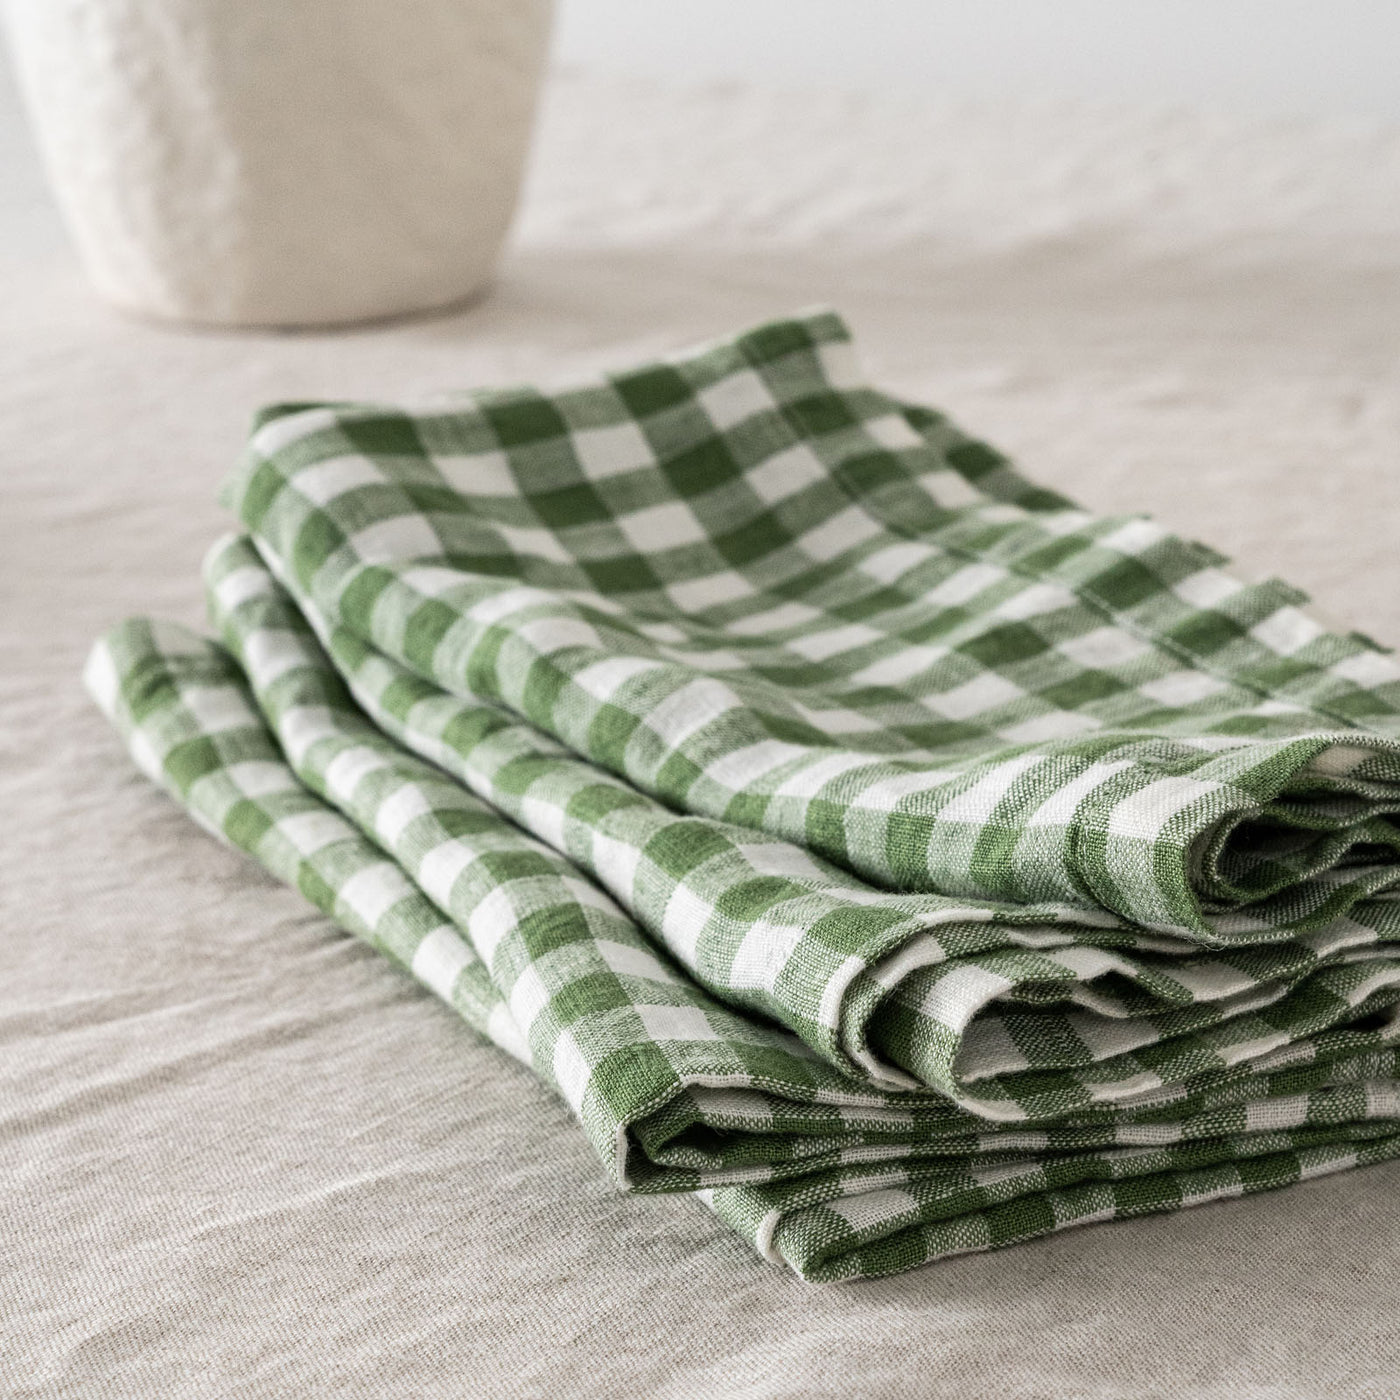 French Flax Linen Napkins (Set Of 4) in Ivy Gingham